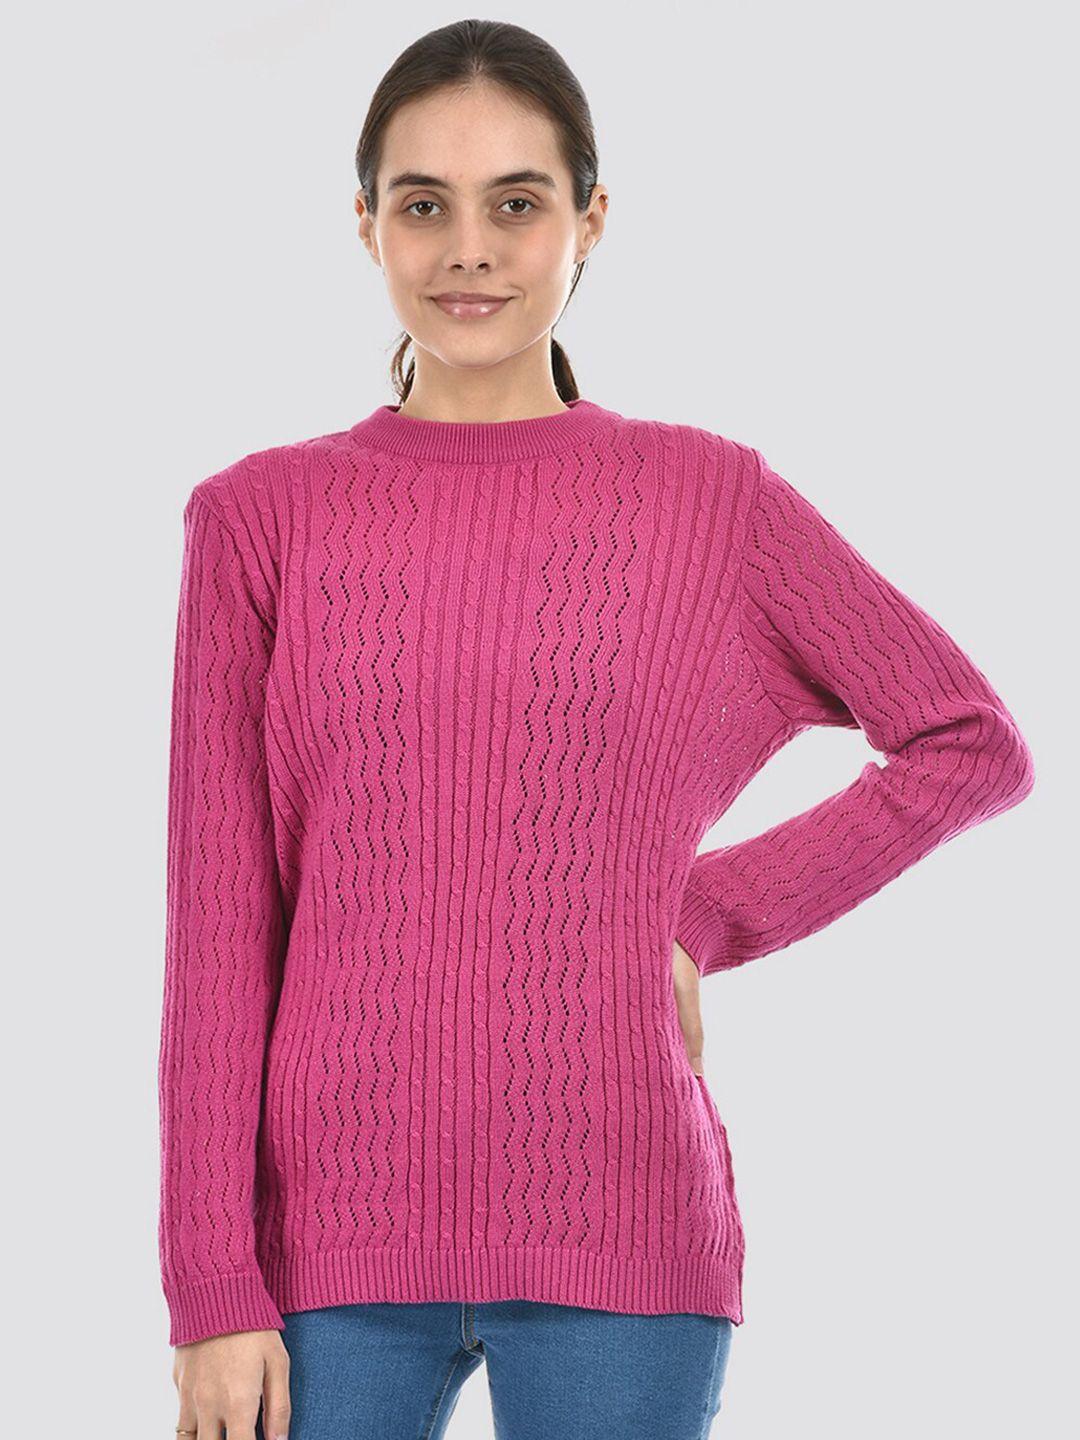 american-eye-cable-knit-self-design-ribbed-acrylic-pullover